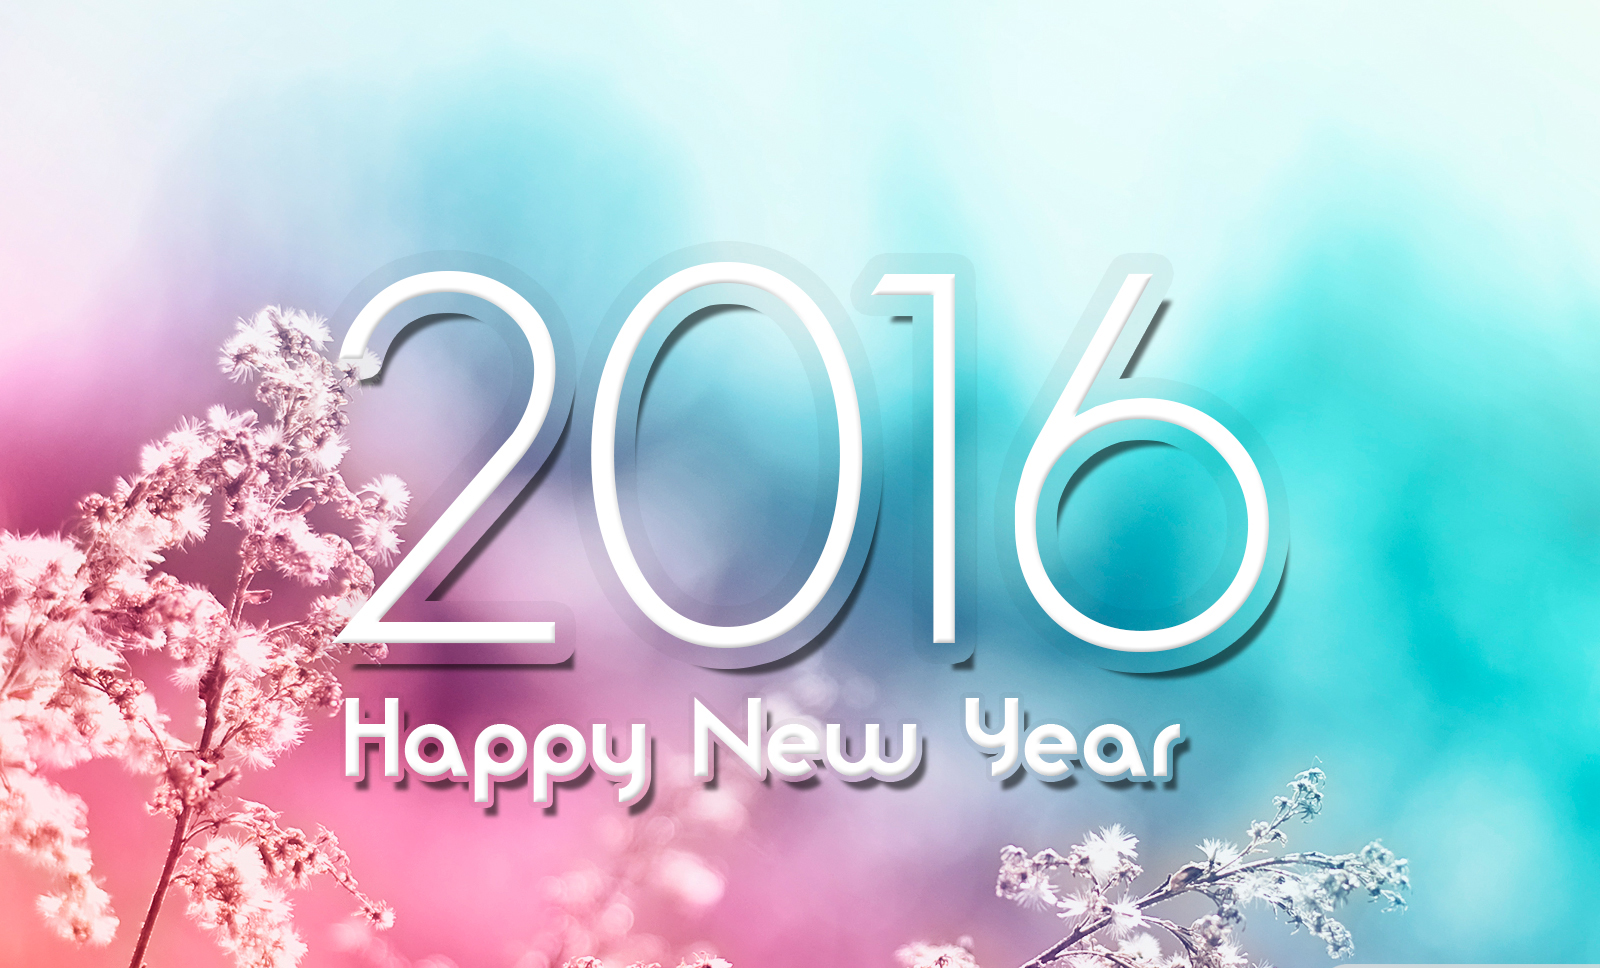 Happy New Year 2016 Background HD Images   Happy New Year 2016 Quotes